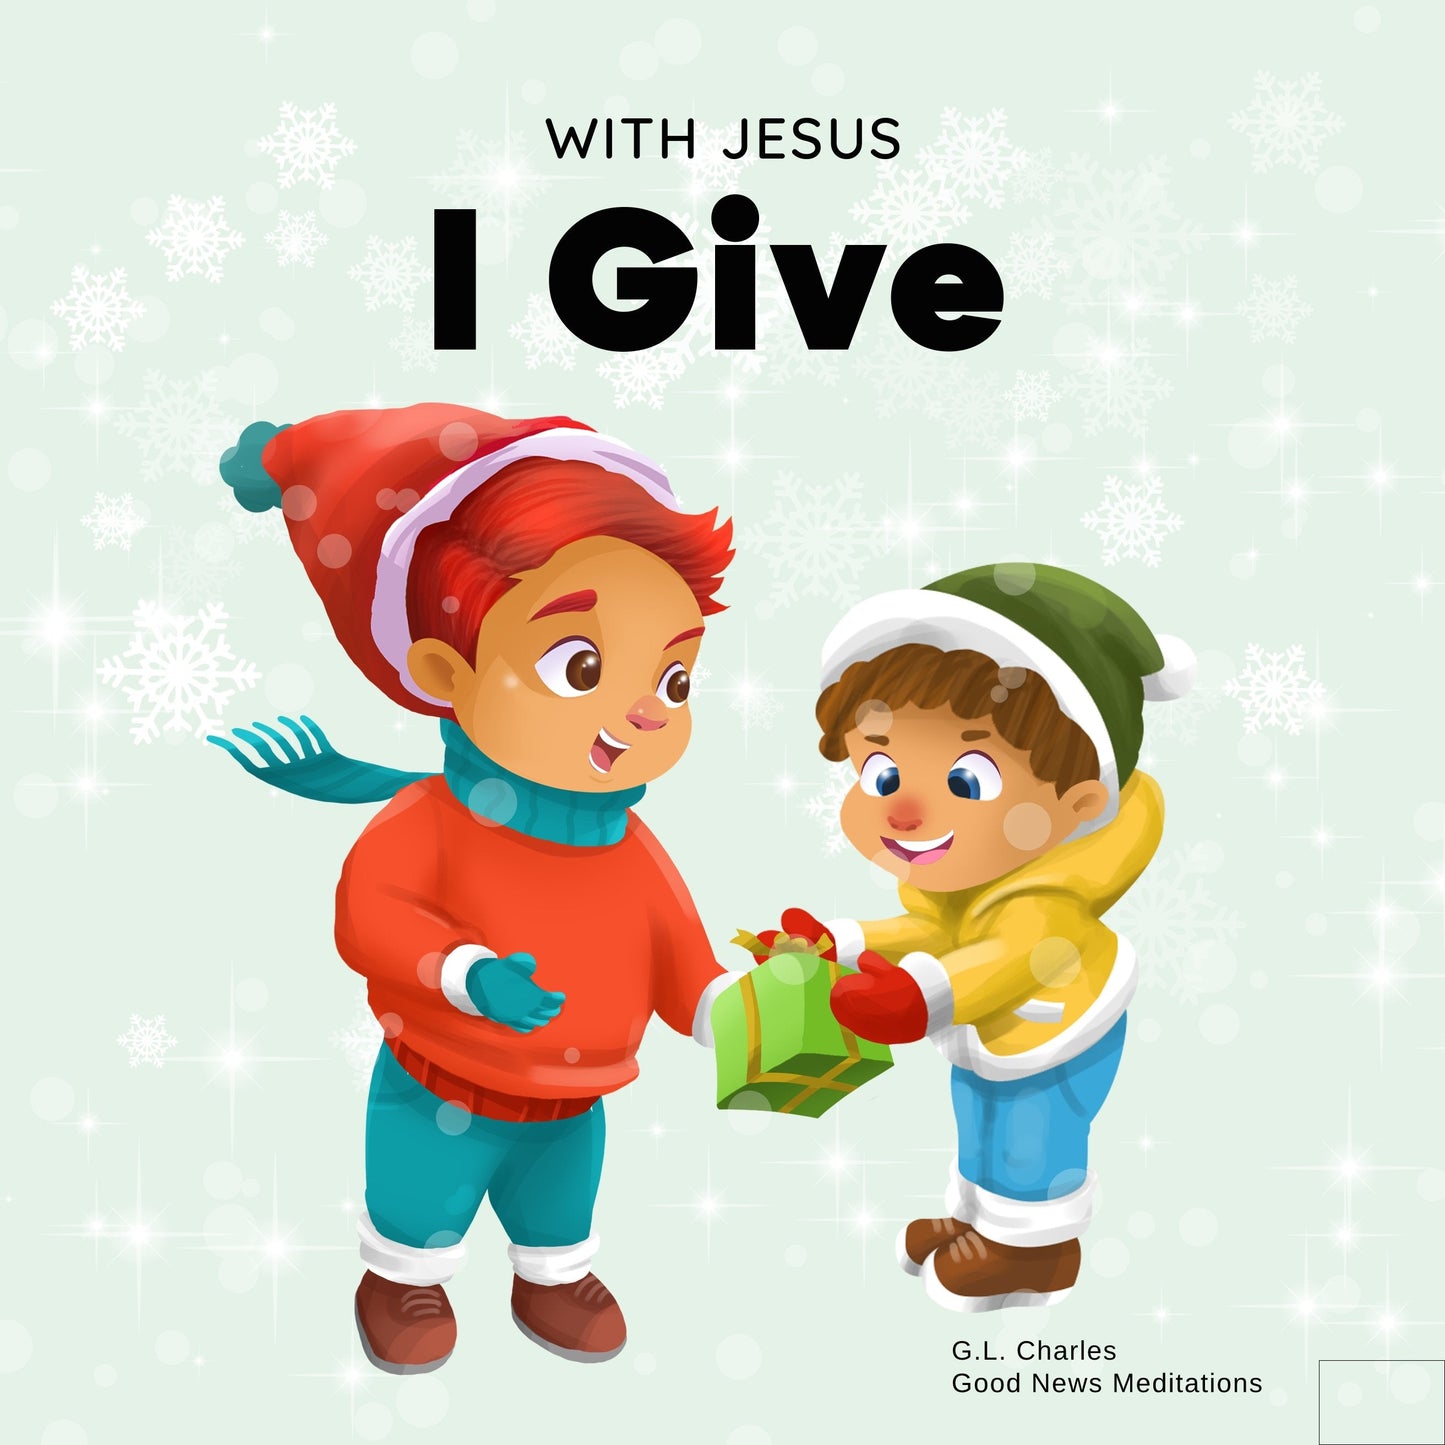 With Jesus I Give - Printed in UK